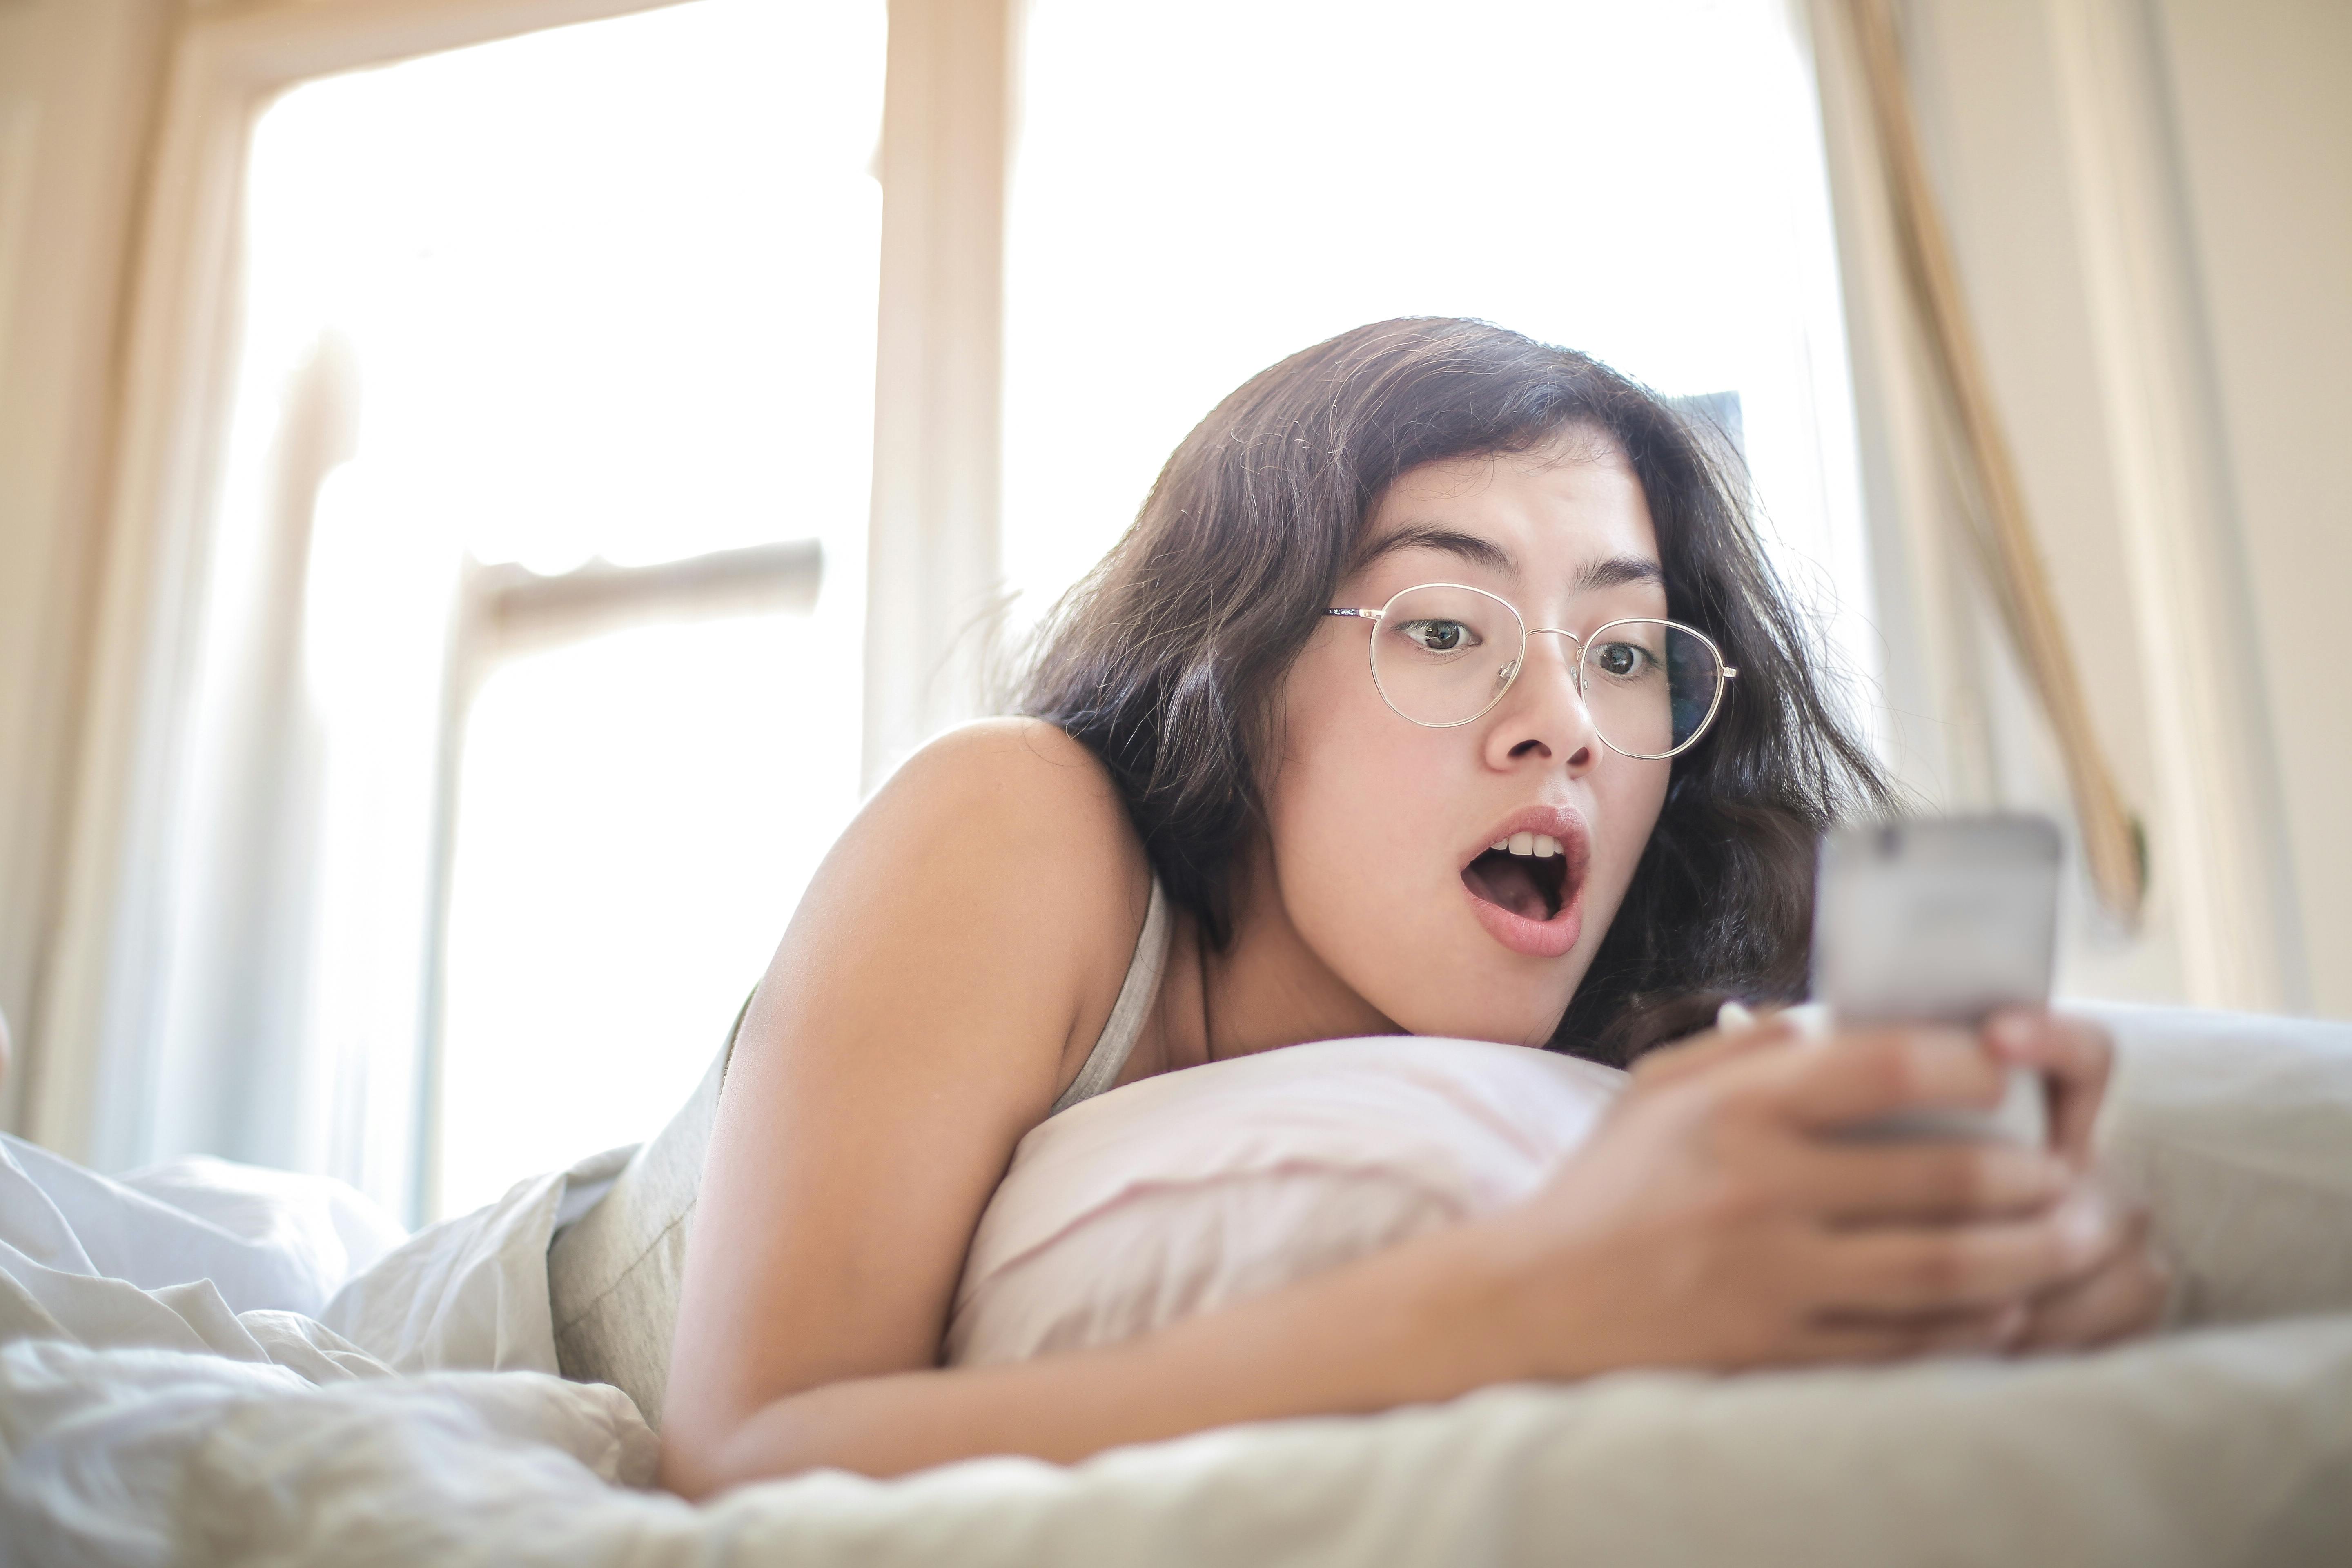 A shocked woman looking at her phone | Source: Pexels